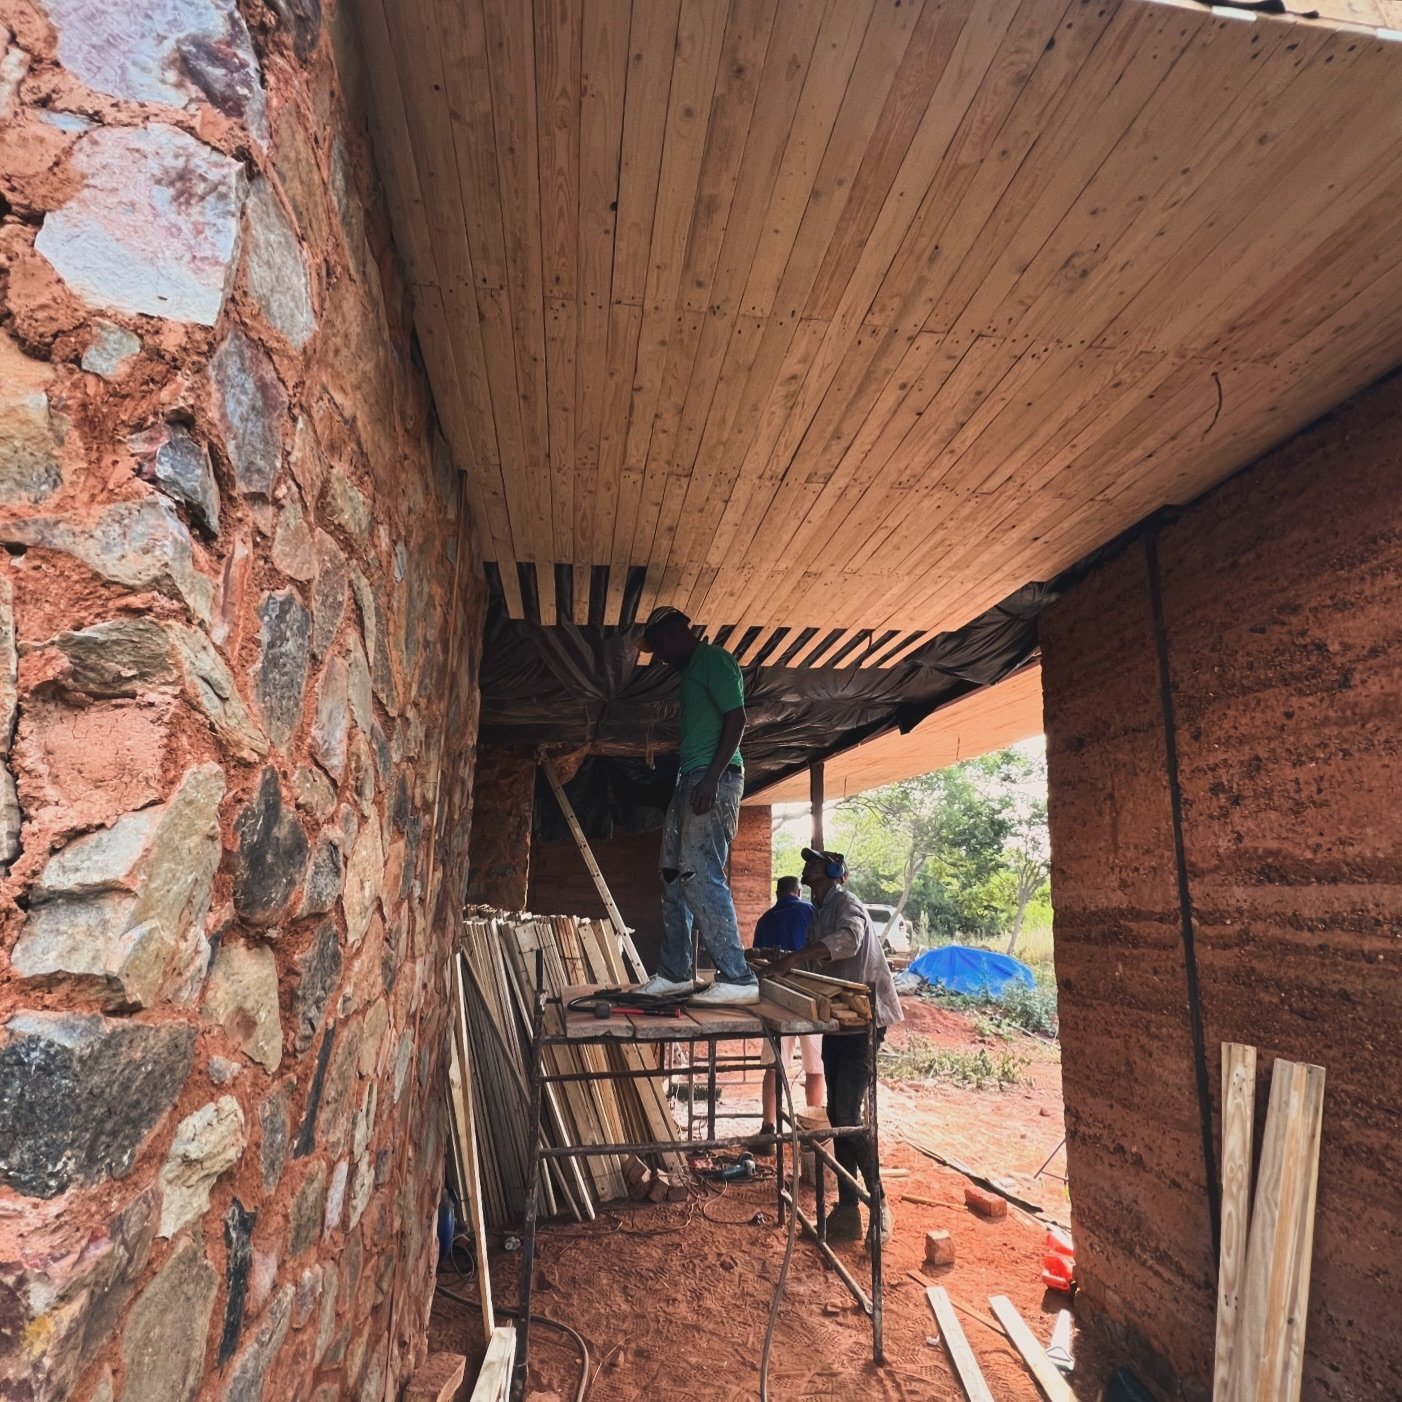 Ceiling is taking shape! 

#architecture #omgfund #airbnbomgfund @airbnb #naturalbuilding